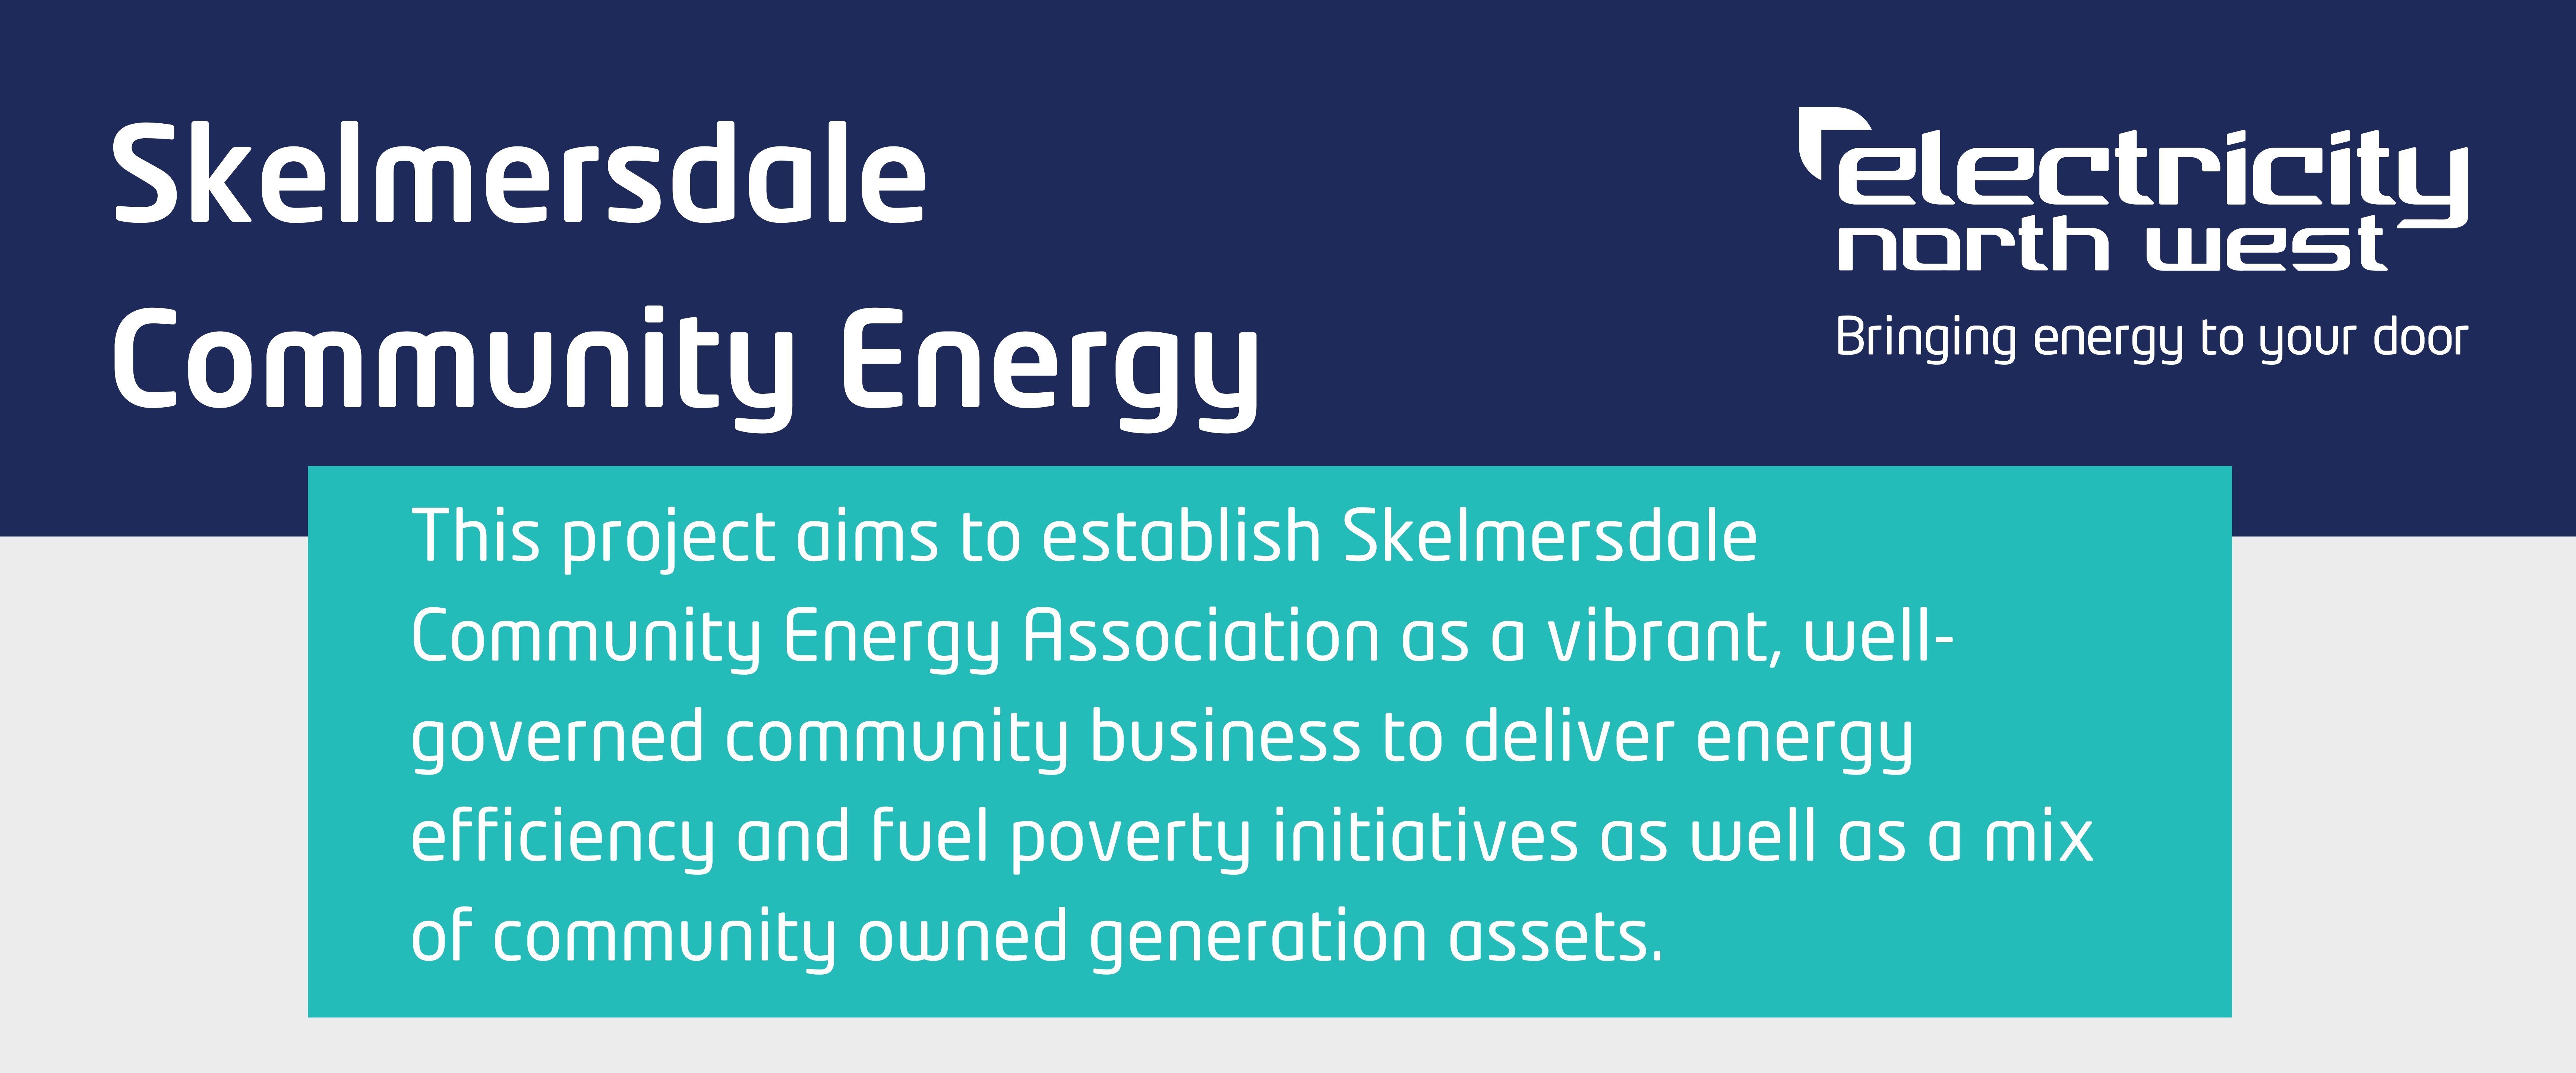 Development of Skelmersdale Community Energy, This project aims to establish Skelmersdale Community Energy Association as a vibrant, well-governed community business to deliver energy efficiency and fuel poverty initiatives as well as a mix of community owned generation assets
